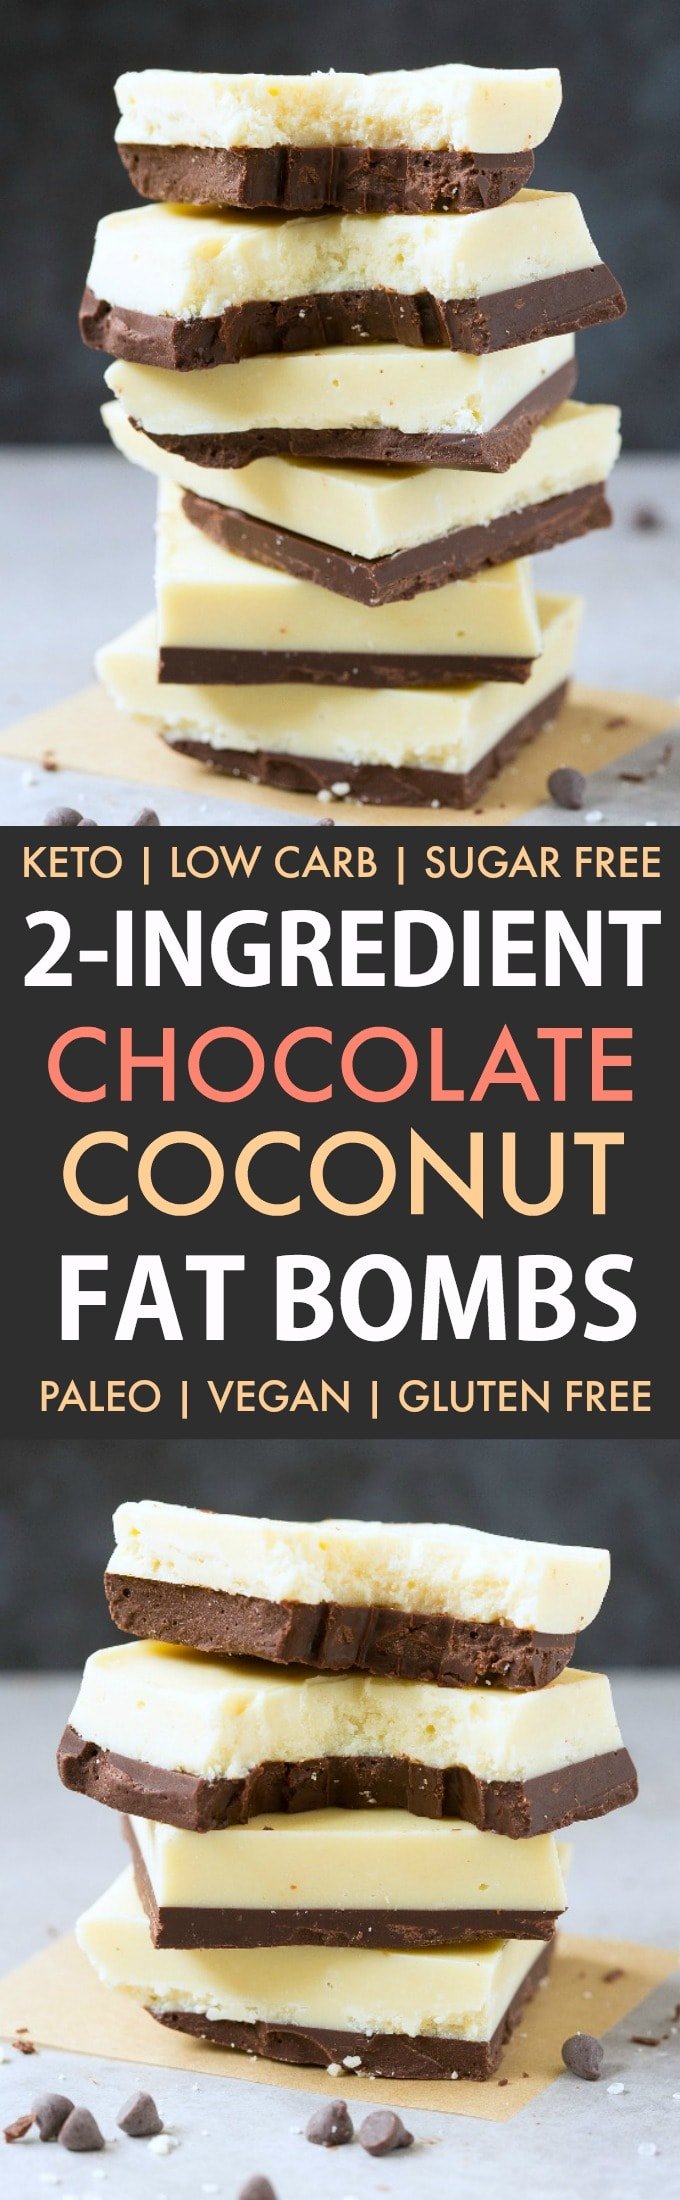 2-Ingredient Low Carb Keto Chocolate Coconut Fat Bombs in a collage